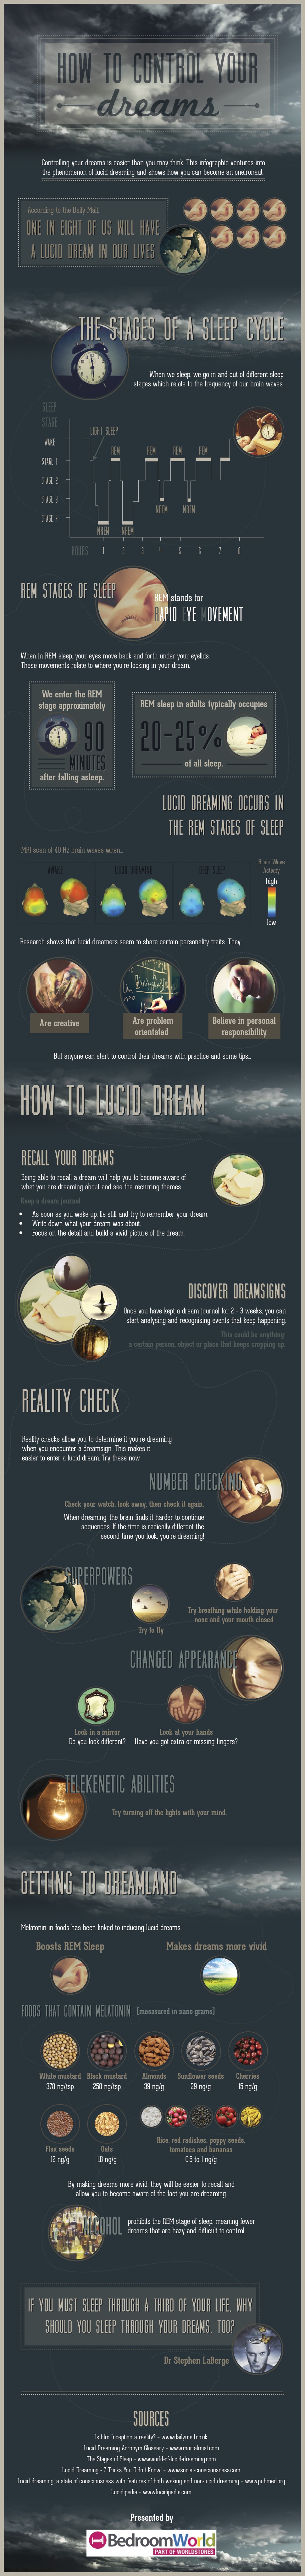 How To Control Your Dreams